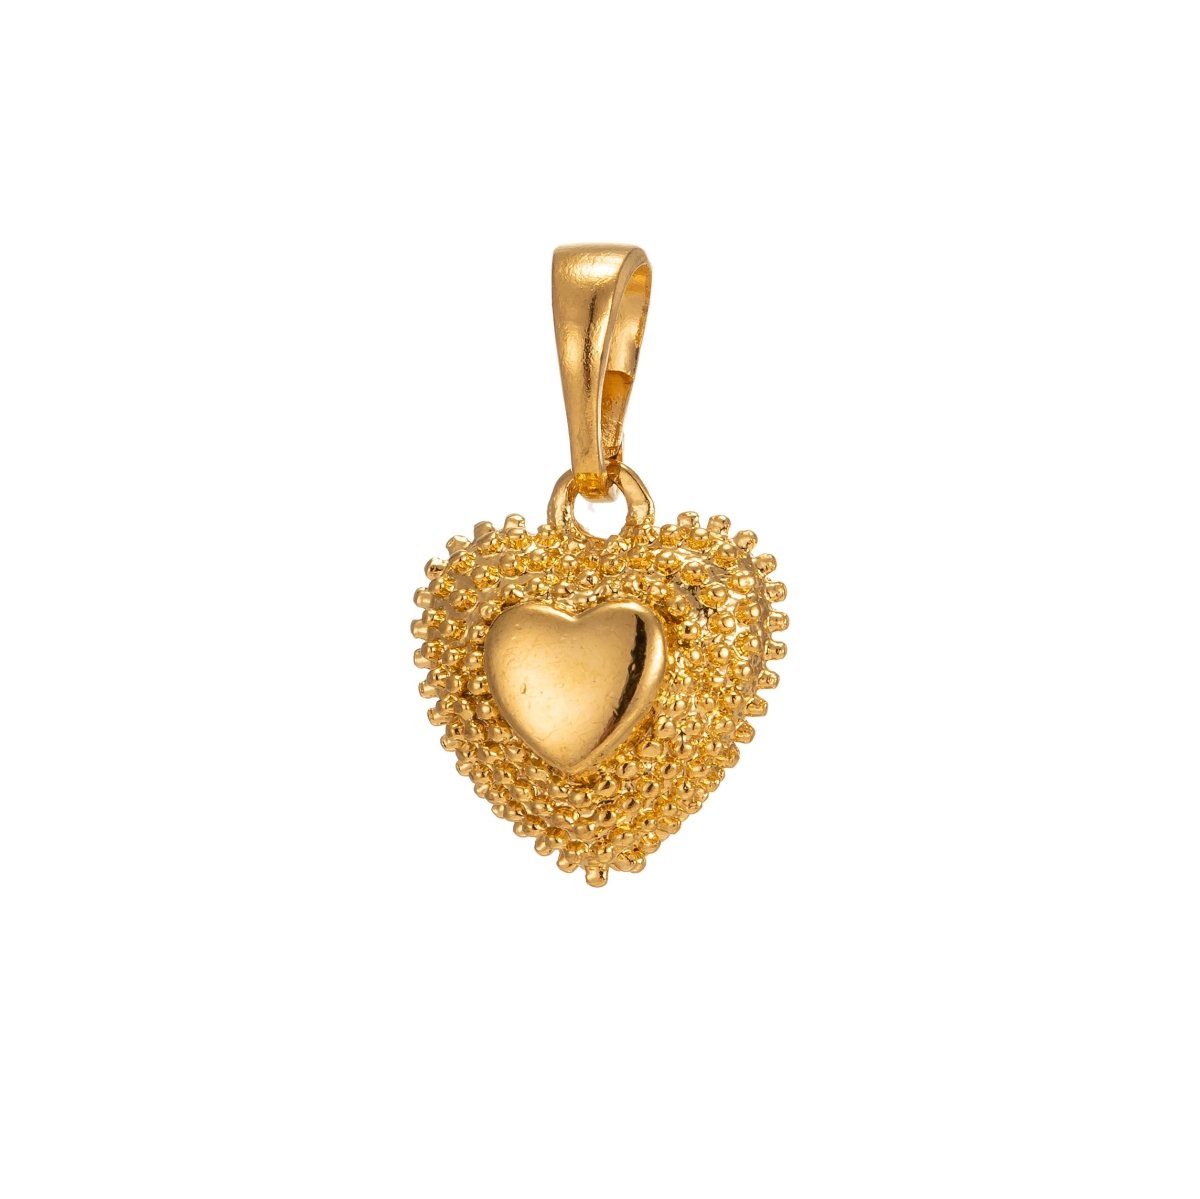 OS DEL-24k Gold Filled Spiky Heart Charm Gold Heart Pendant Horn Love Jewelry Making Supply I-196 - DLUXCA